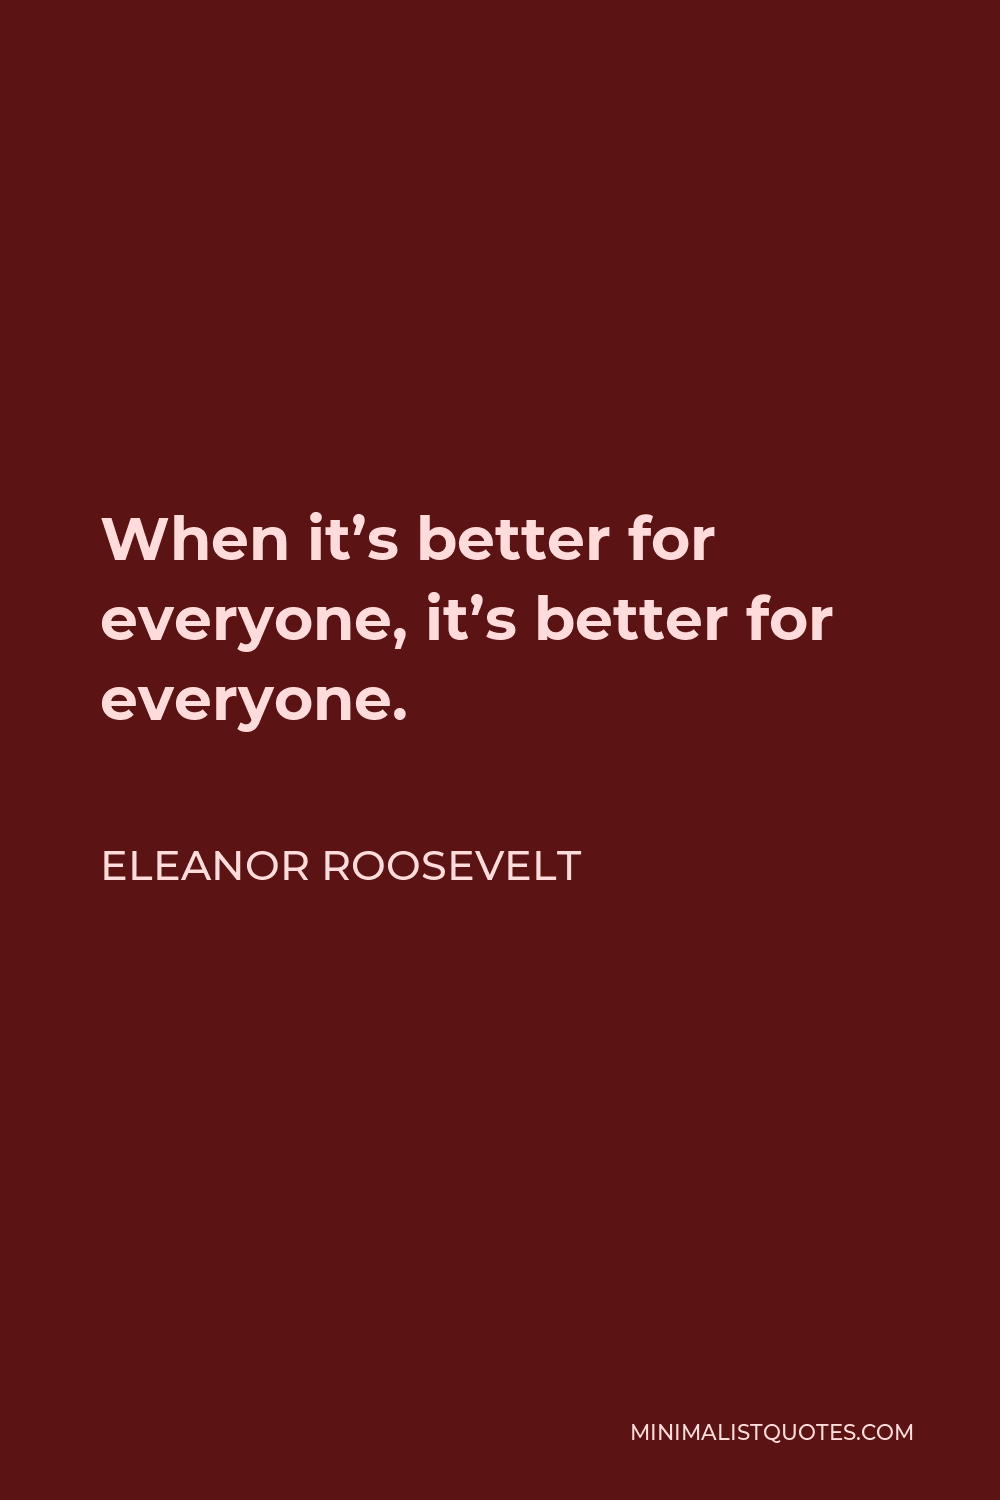 Eleanor Roosevelt Quote - When it’s better for everyone, it’s better for everyone.